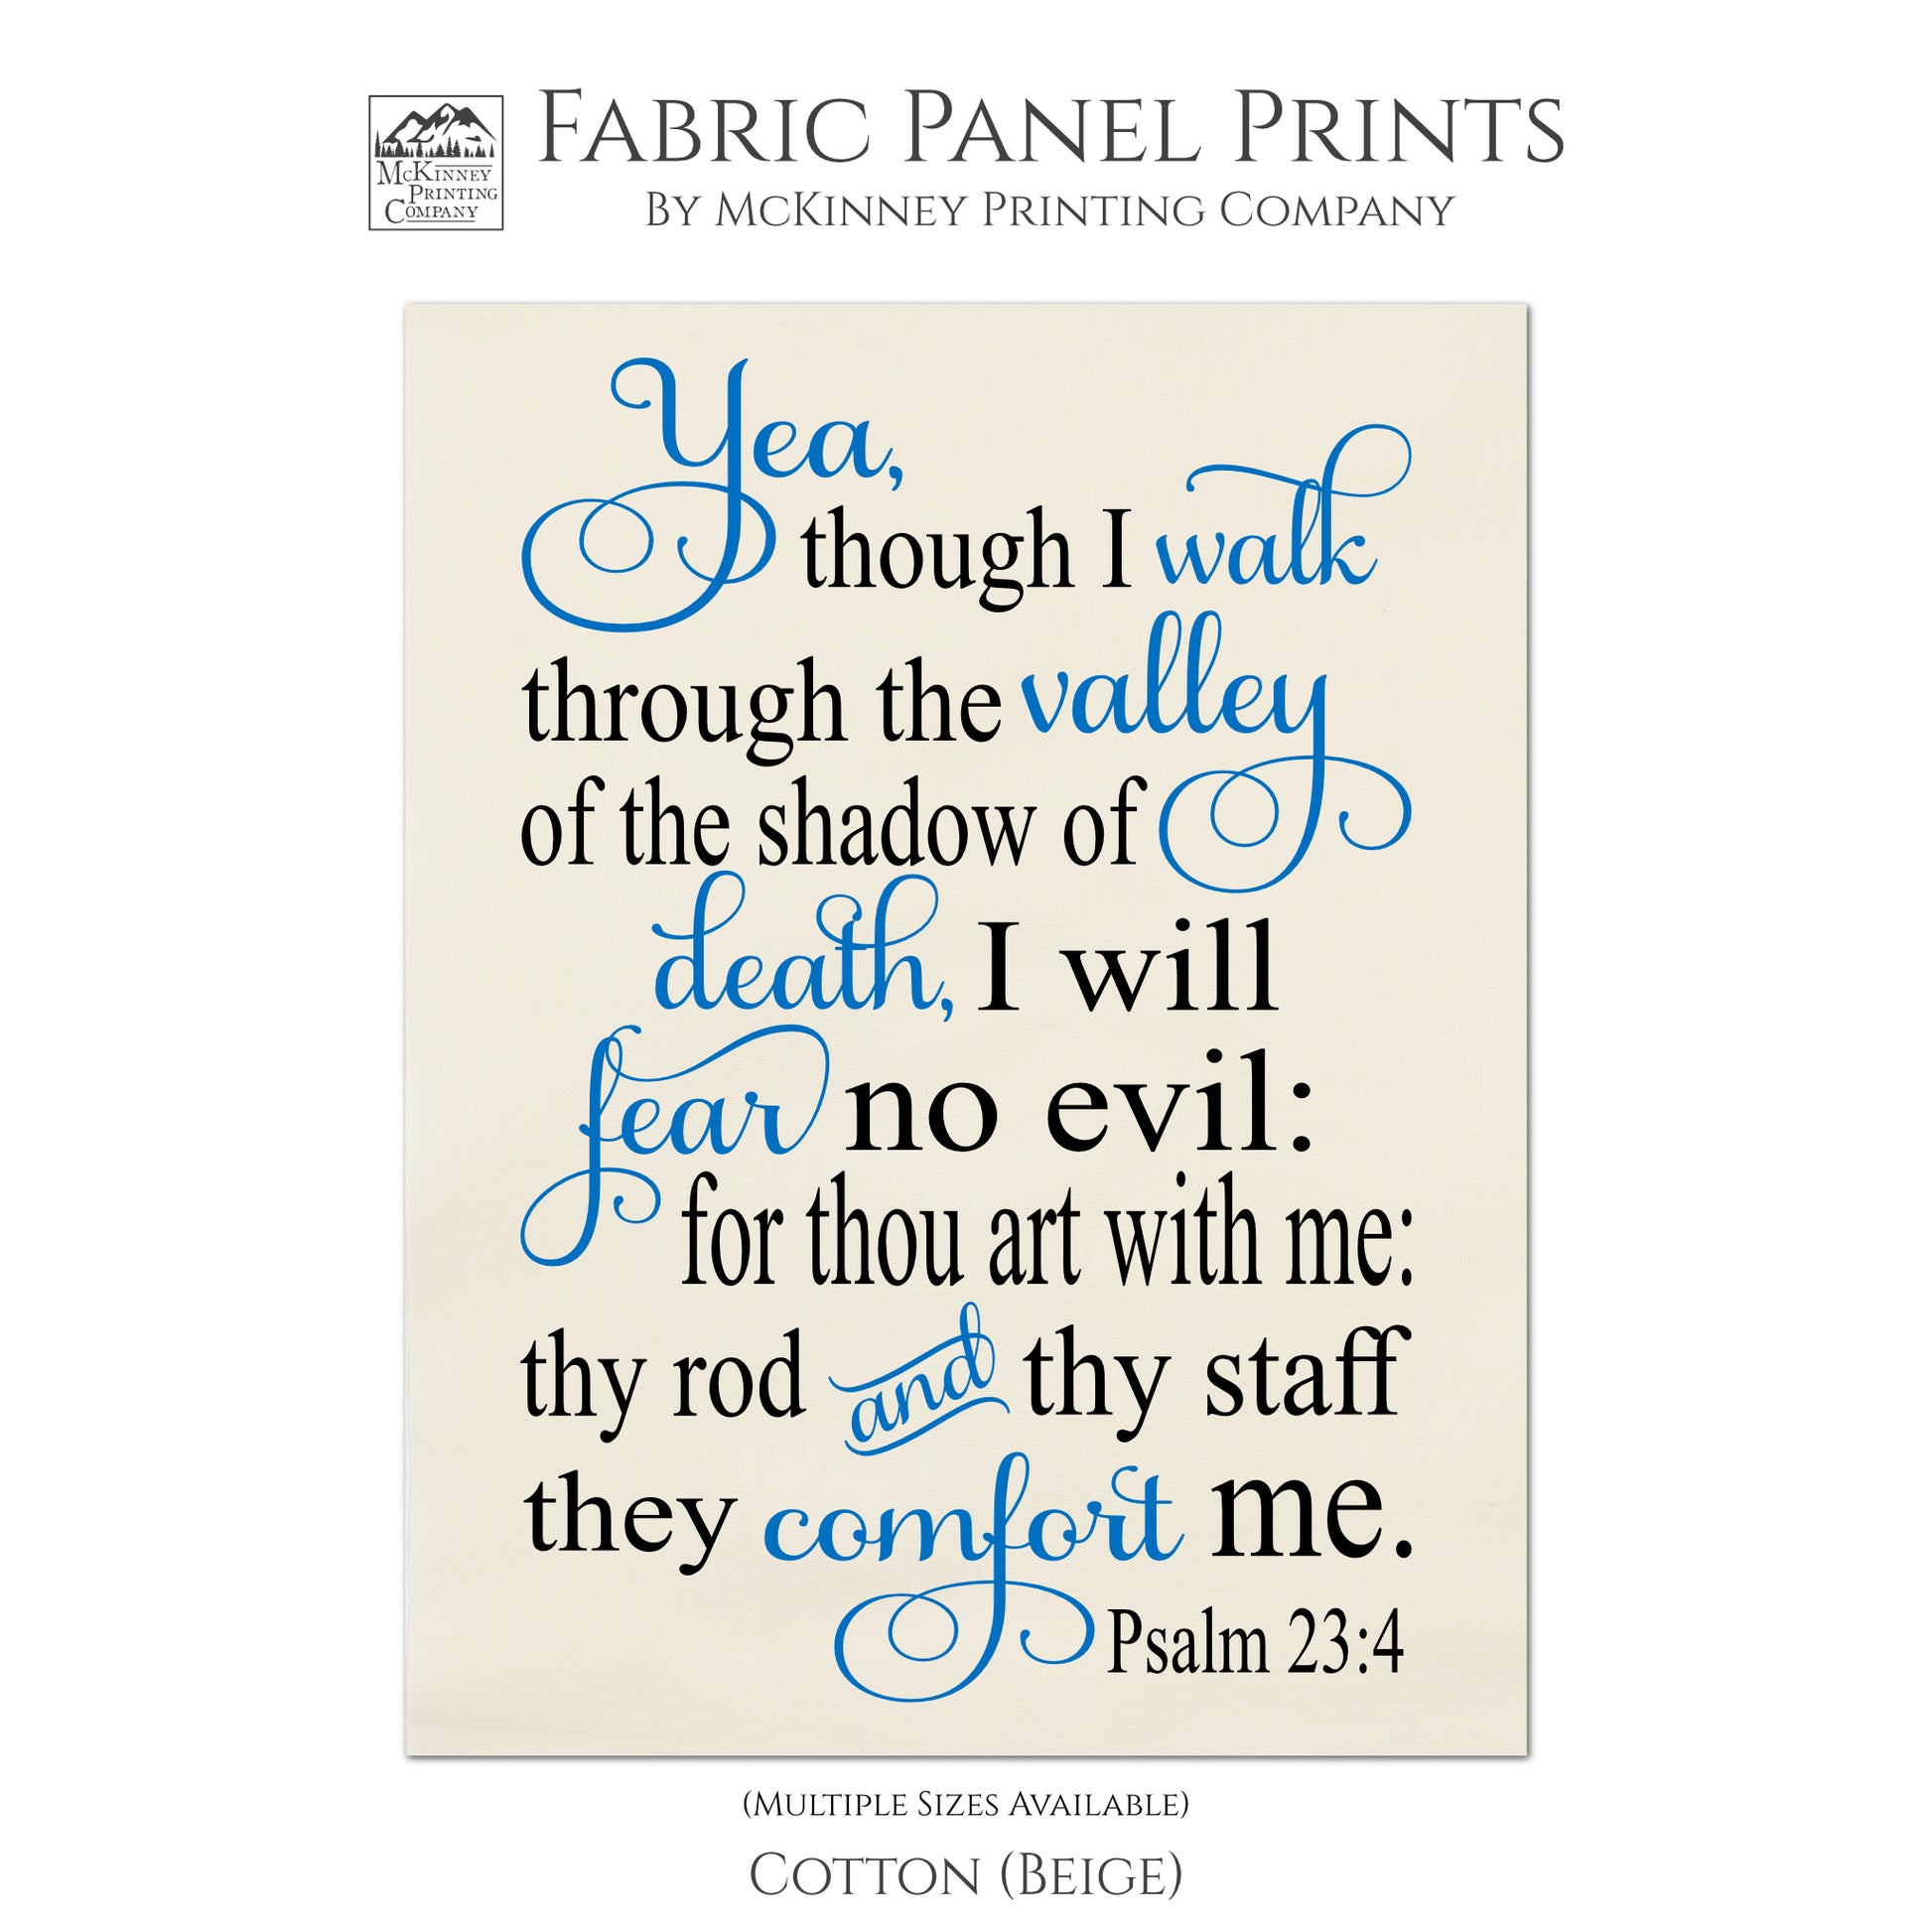 Yea, though I walk through the valley of the shadow of death, I will fear no evil: for thou art with me: they rod and they staff they comfort me - Psalm 23:4 - Scripture Fabric, Panel, Quilt Block - Cotton